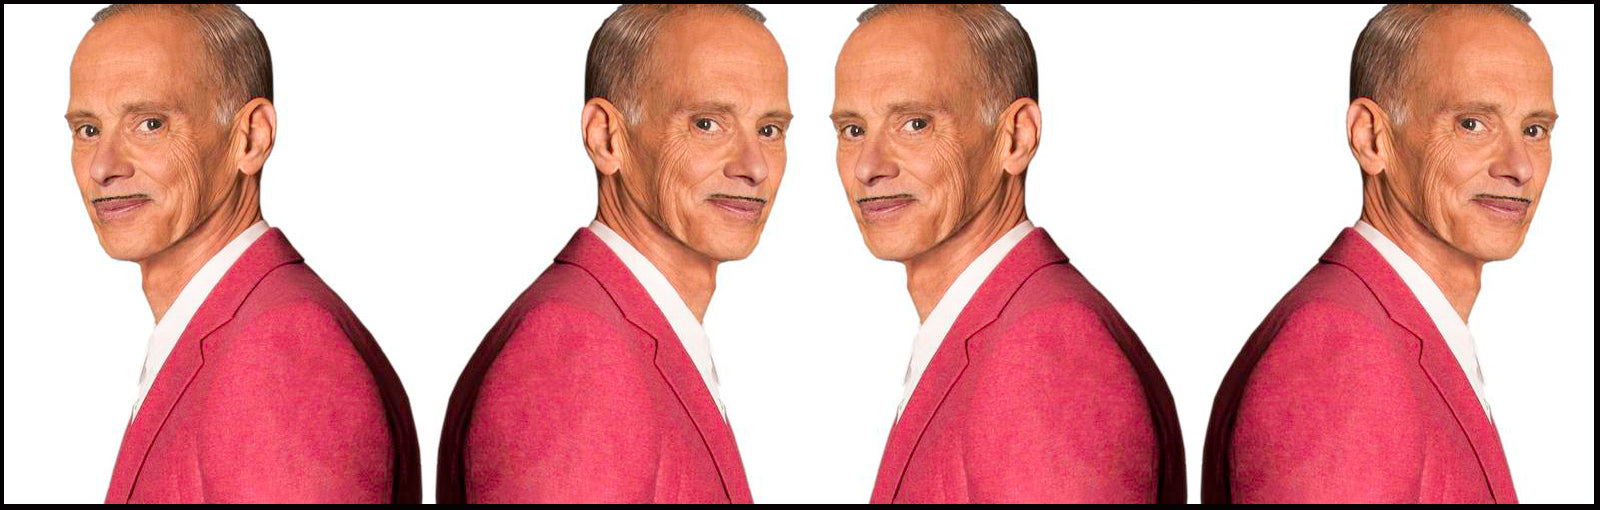 JOHN WATERS: THE POPE OF TRASH